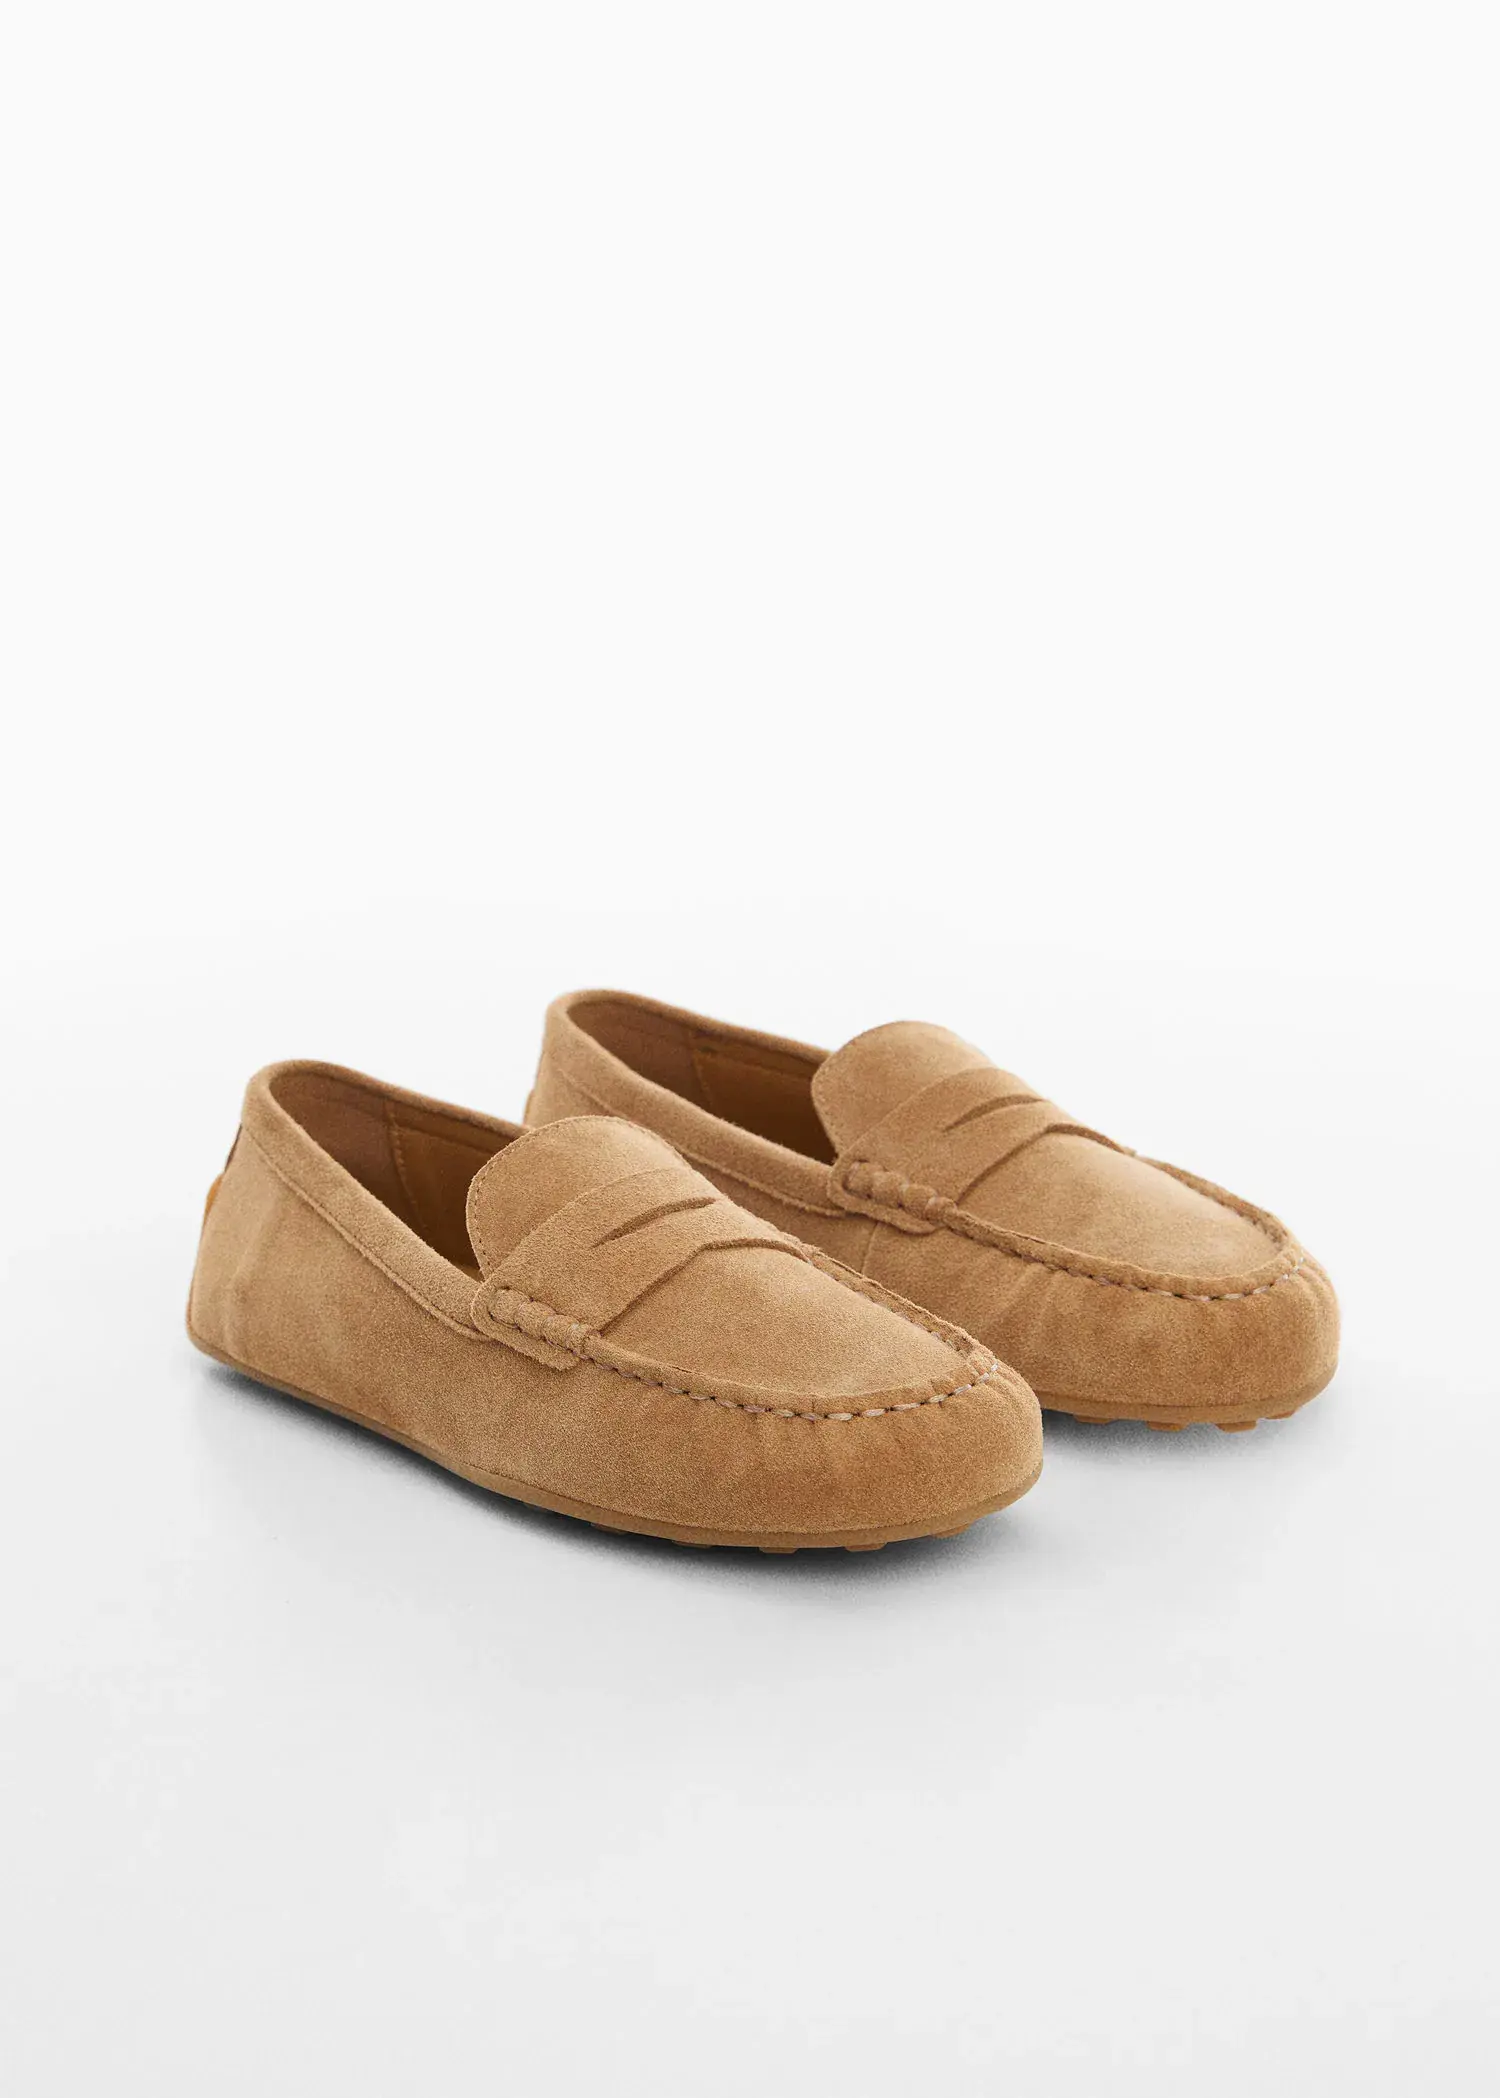 Mango Suede leather moccasin. 2